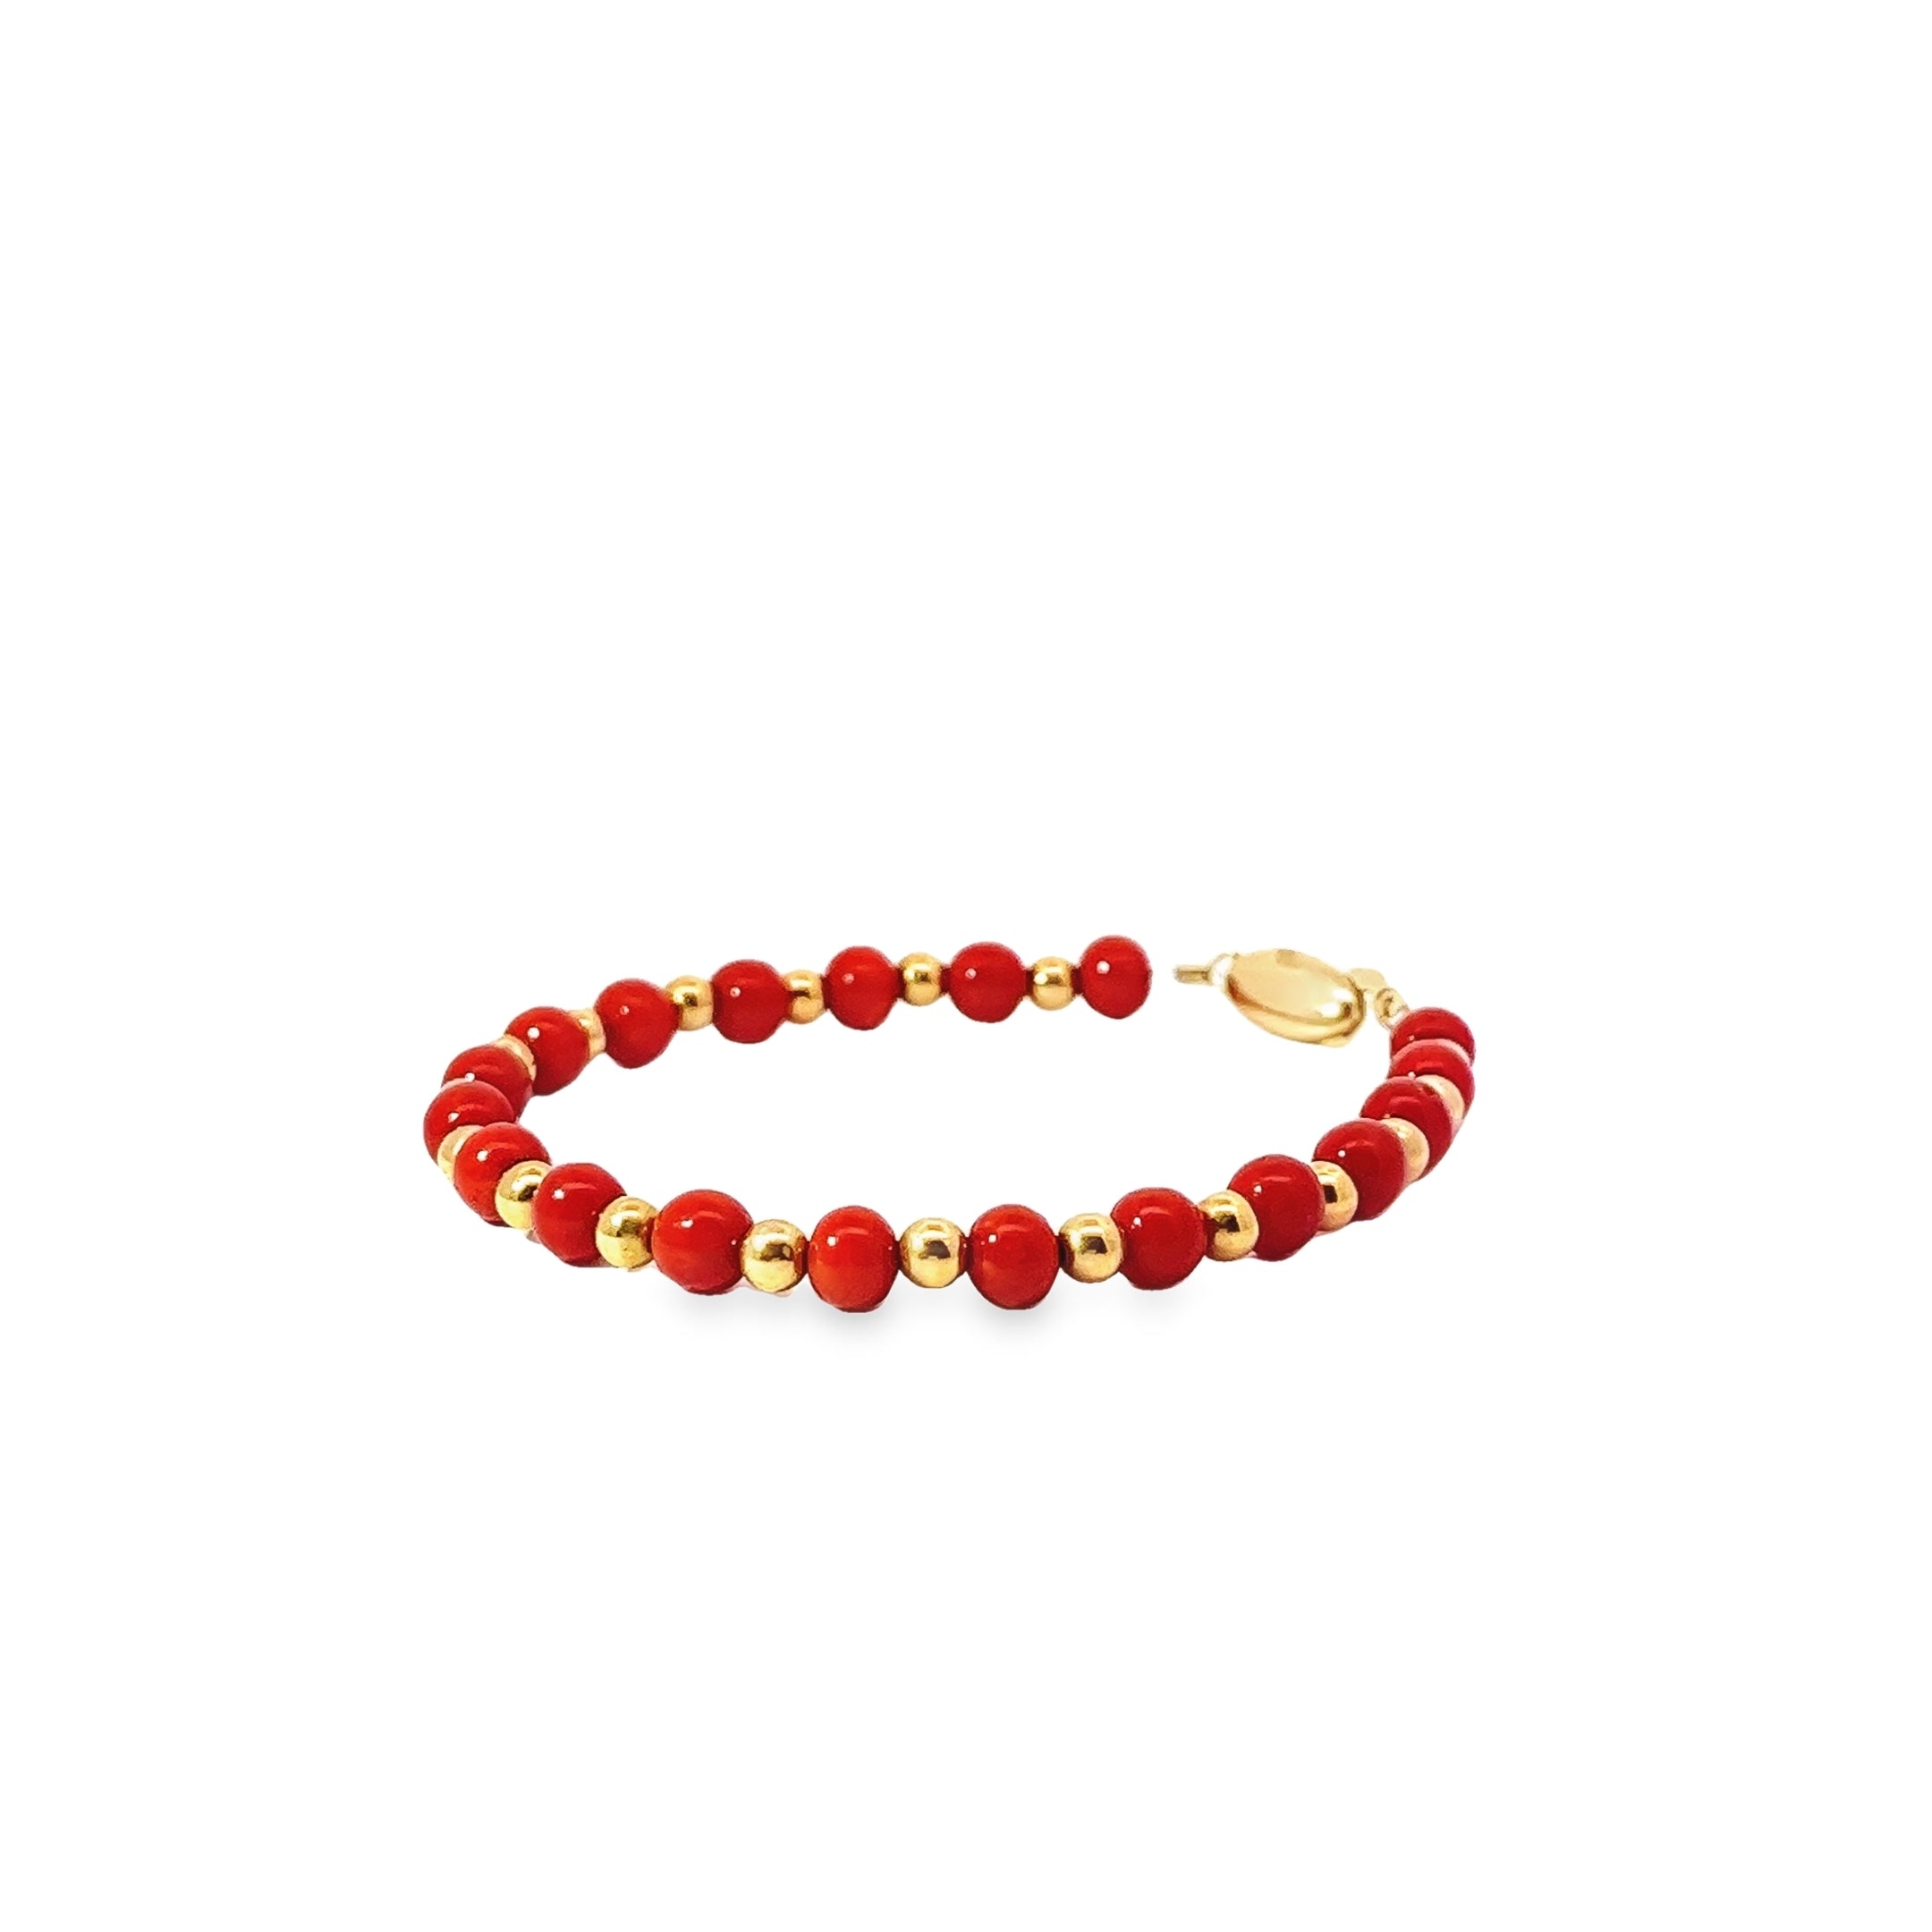 Ladies 14k yellow gold Genuine Coral and Gold Beaded Bracelet